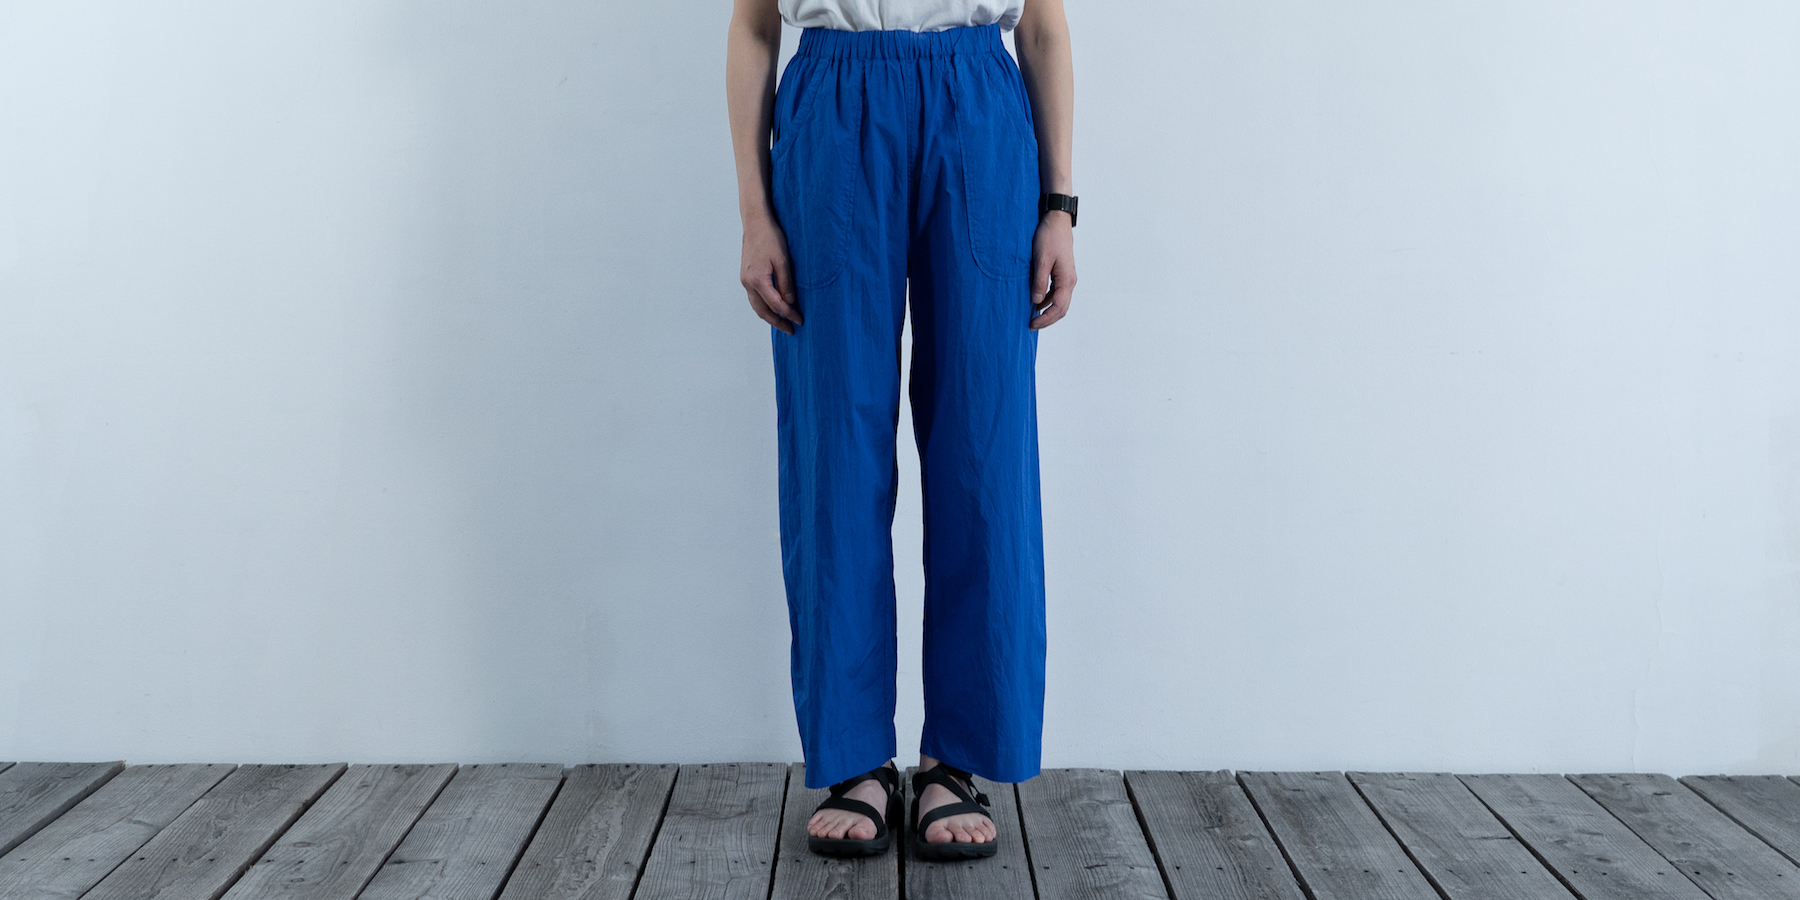 【sold out】d WEAR カーゴパンツ・塩縮加工 ブルー・XL